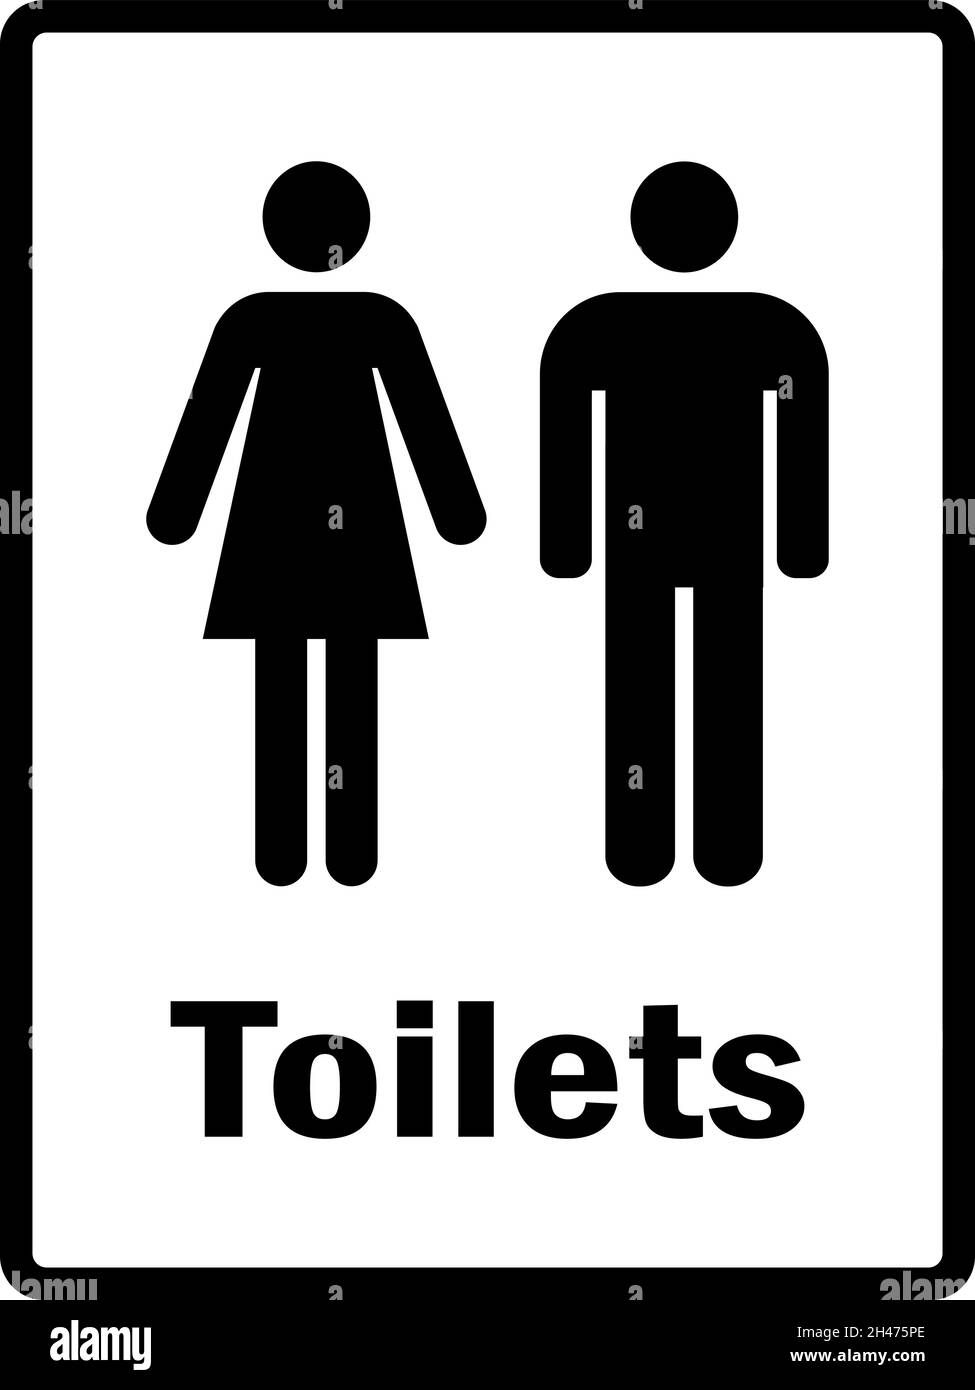 Toilets sign.Men and women silhouette. Black on white background. Stock Vector